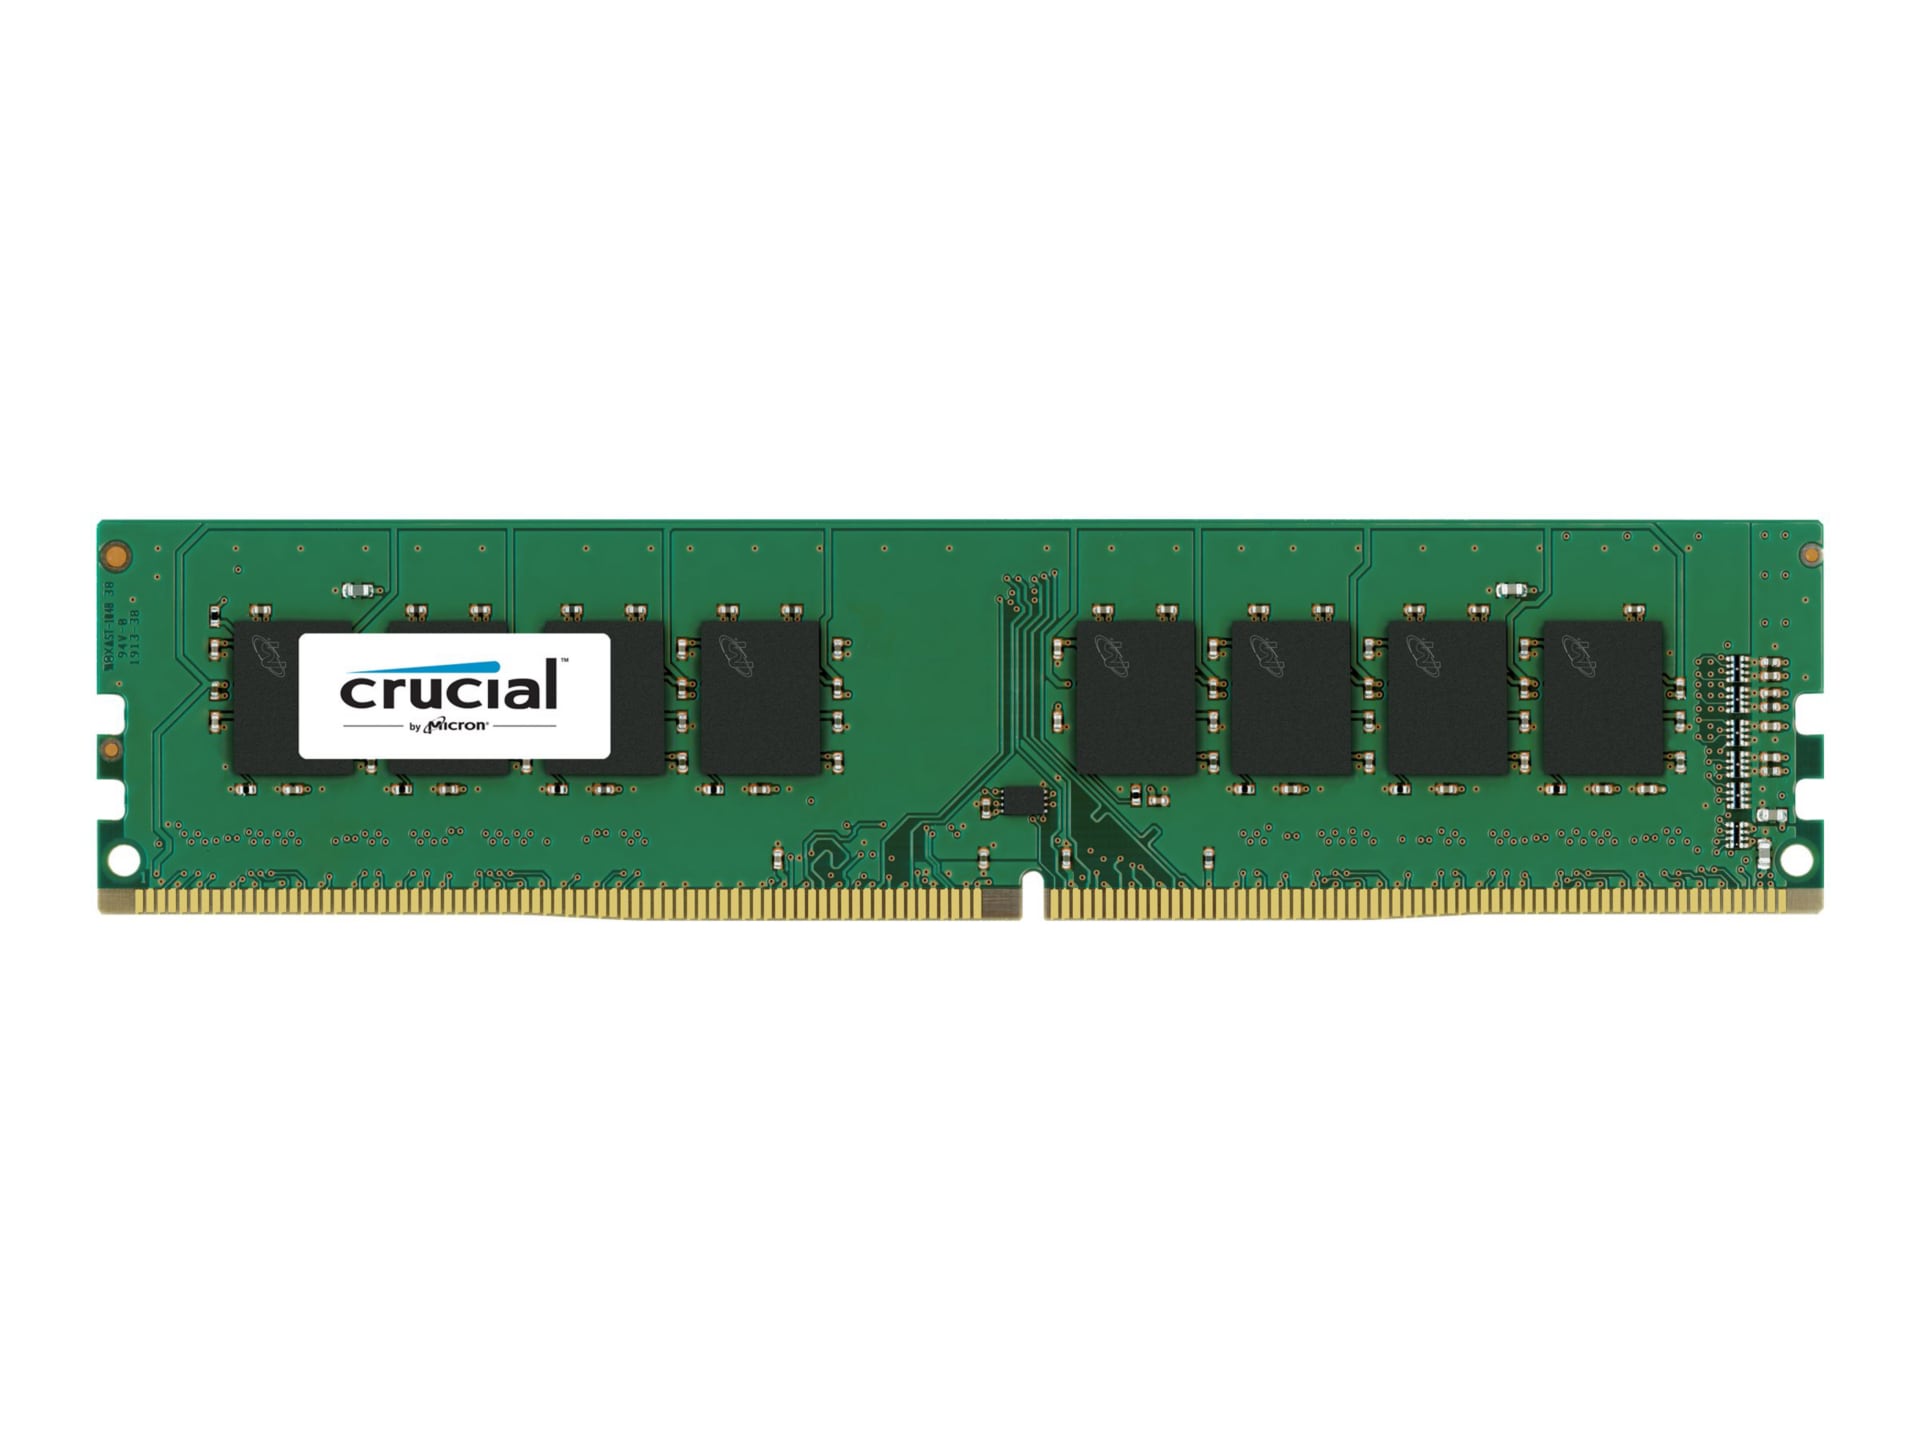 Crucial - DDR4 2400 Computer - PC4-19200 8 - / 288-pin GB module MHz - DIMM CT8G4DFS824A - Memory - - - unbuffered